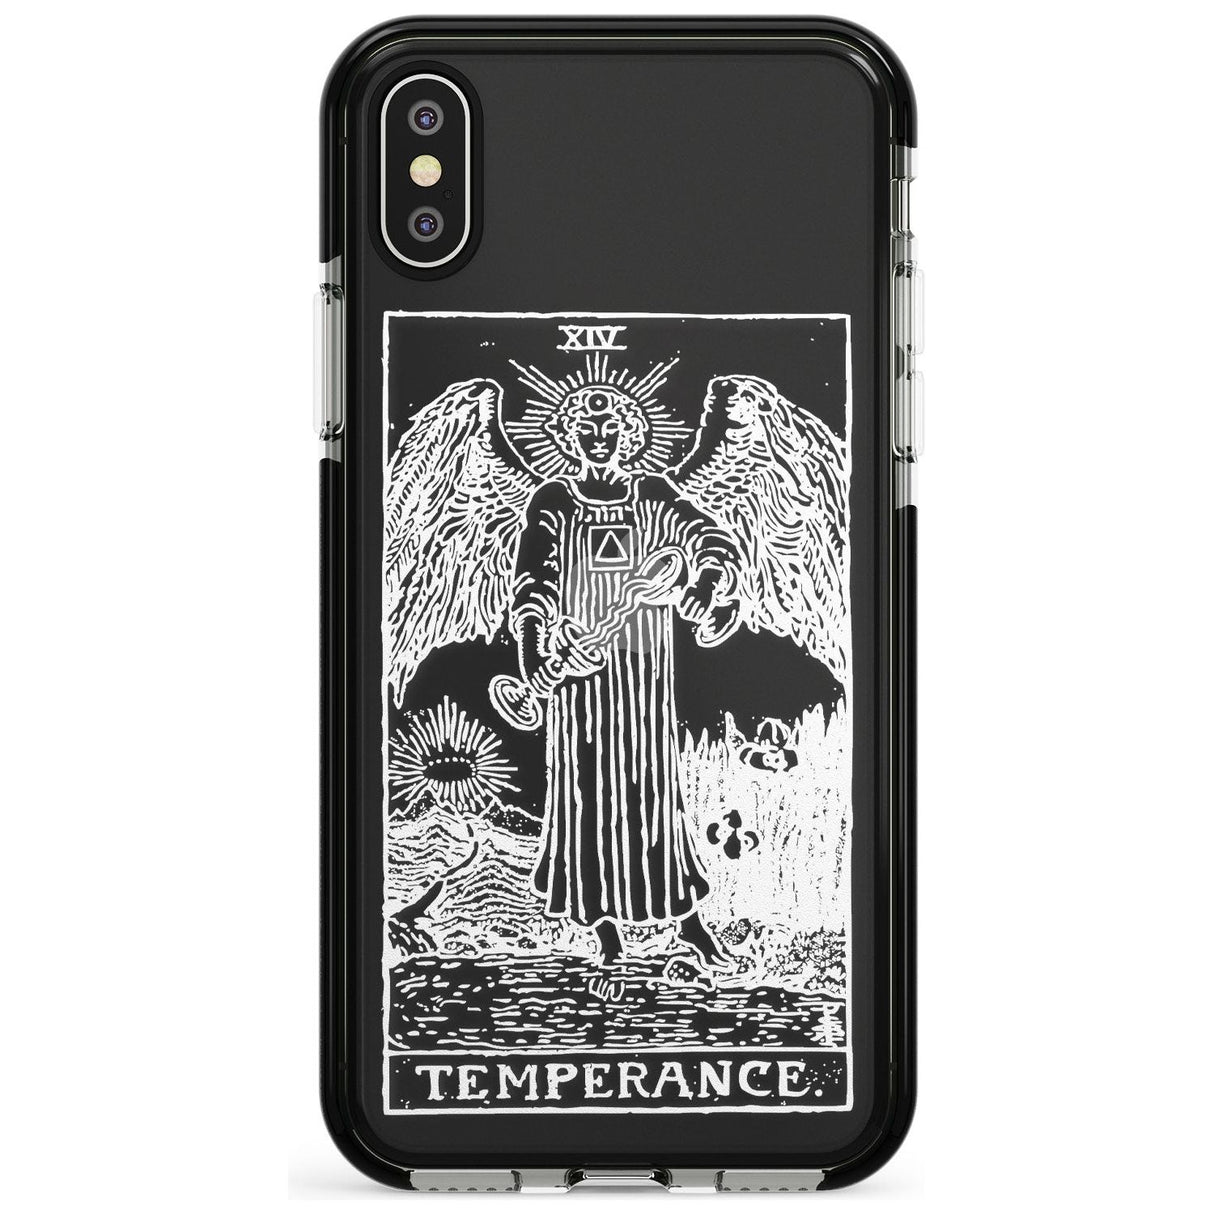 Temperance Tarot Card - White Transparent Pink Fade Impact Phone Case for iPhone X XS Max XR